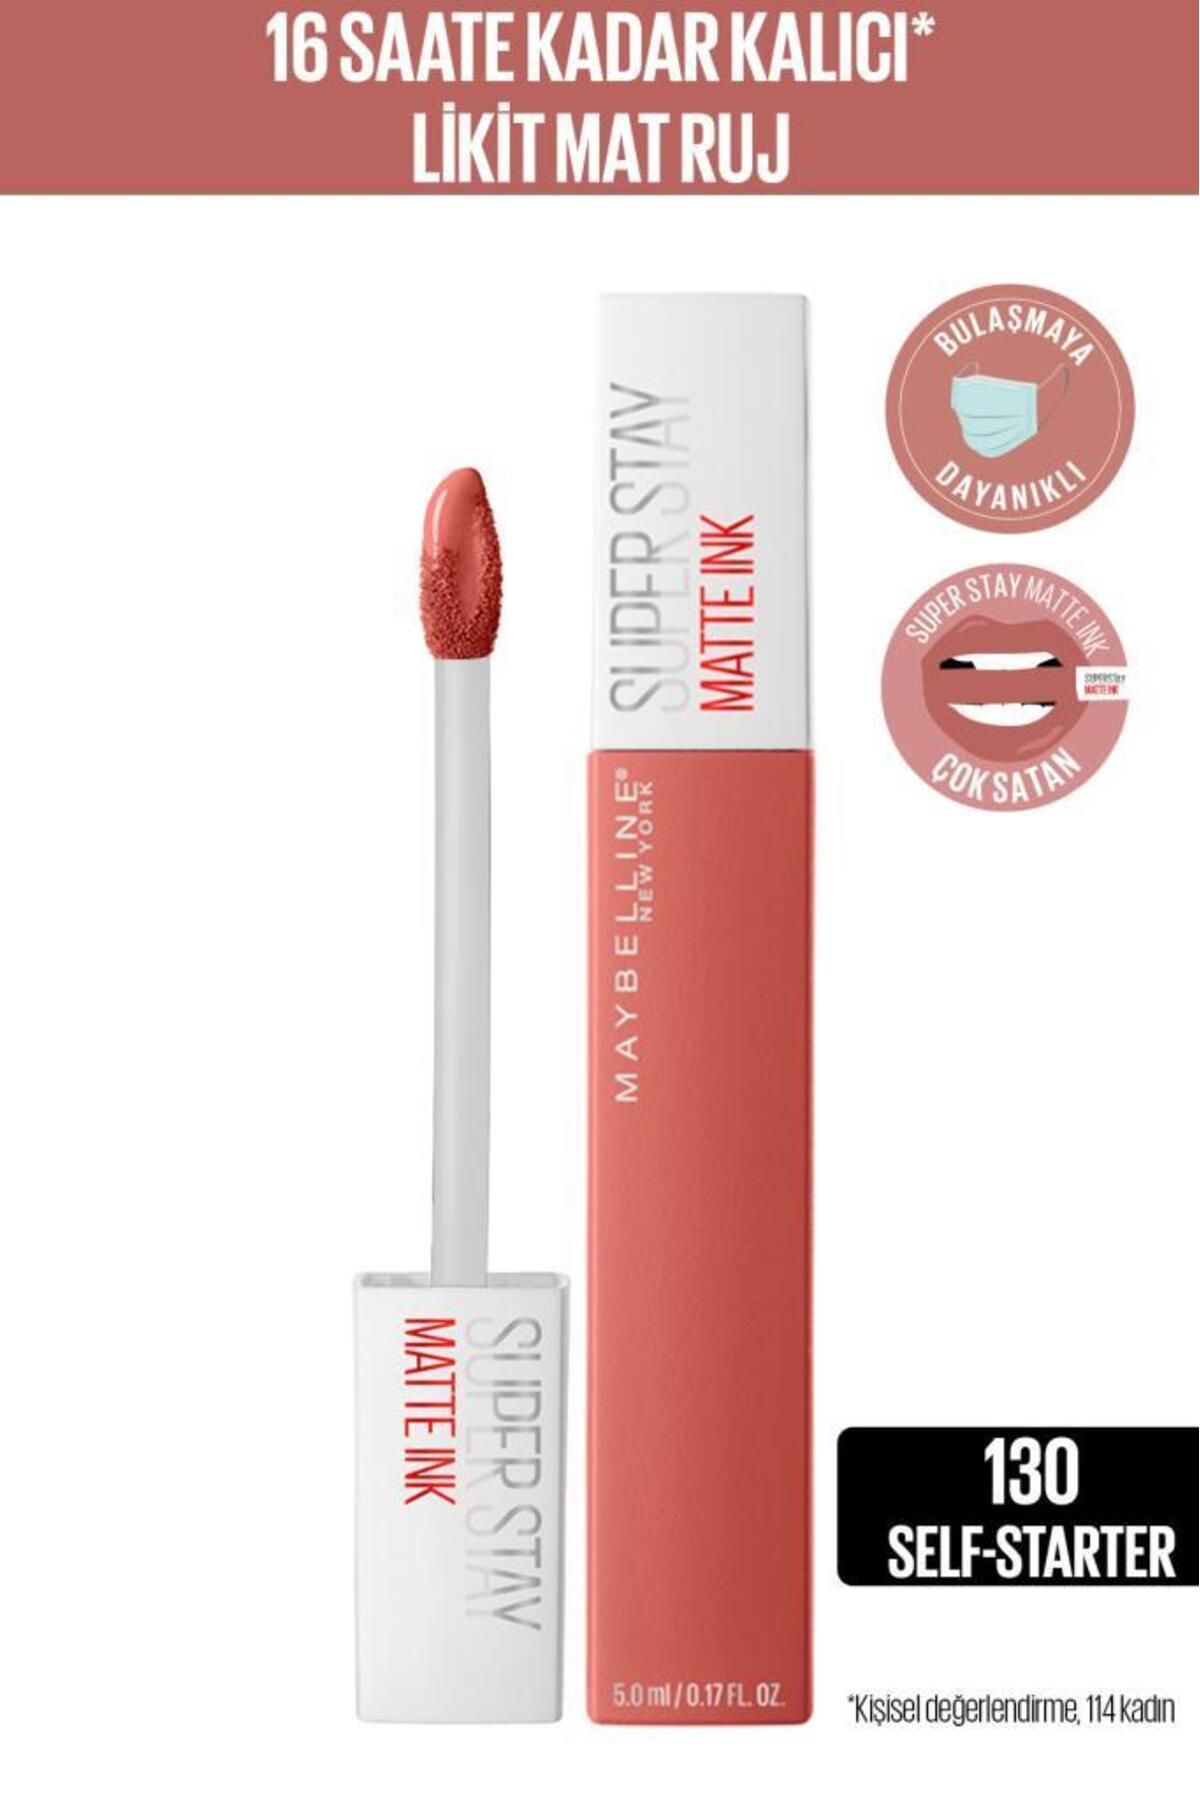 Maybelline New York Super Stay Matte Ink City Edition Likit Mat Ruj - 130 Self-starter